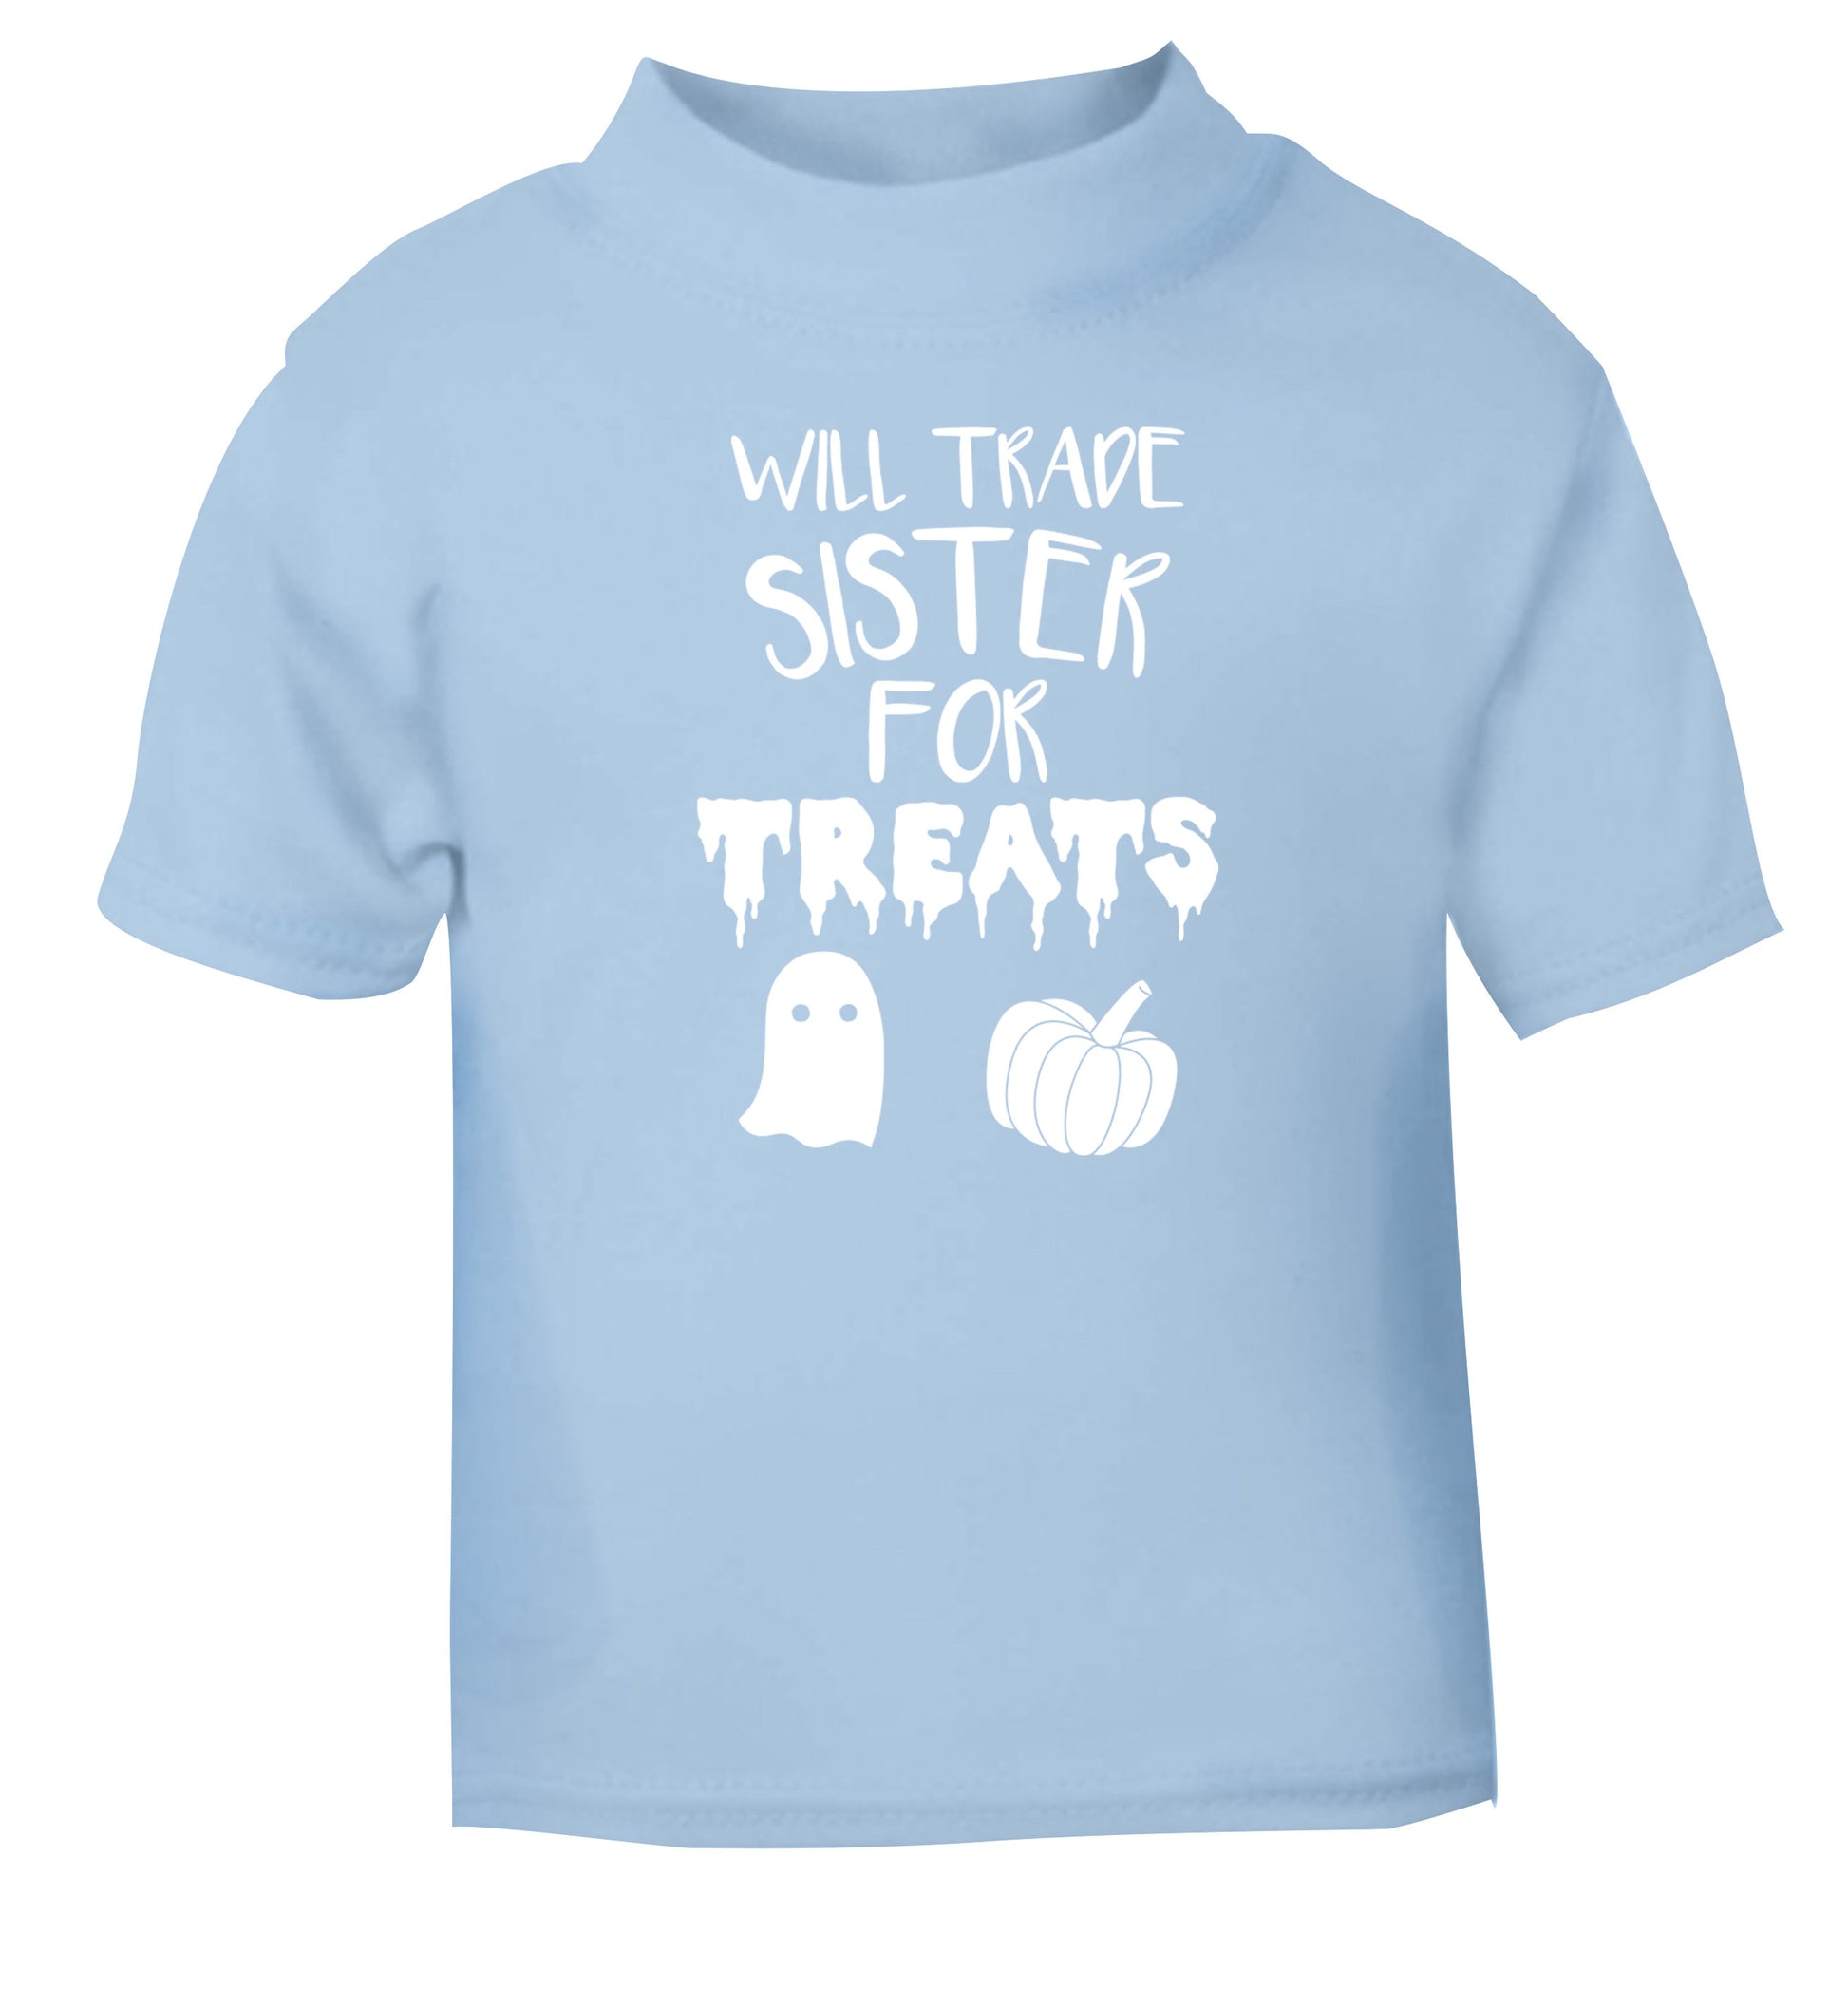 Will trade sister for treats light blue Baby Toddler Tshirt 2 Years